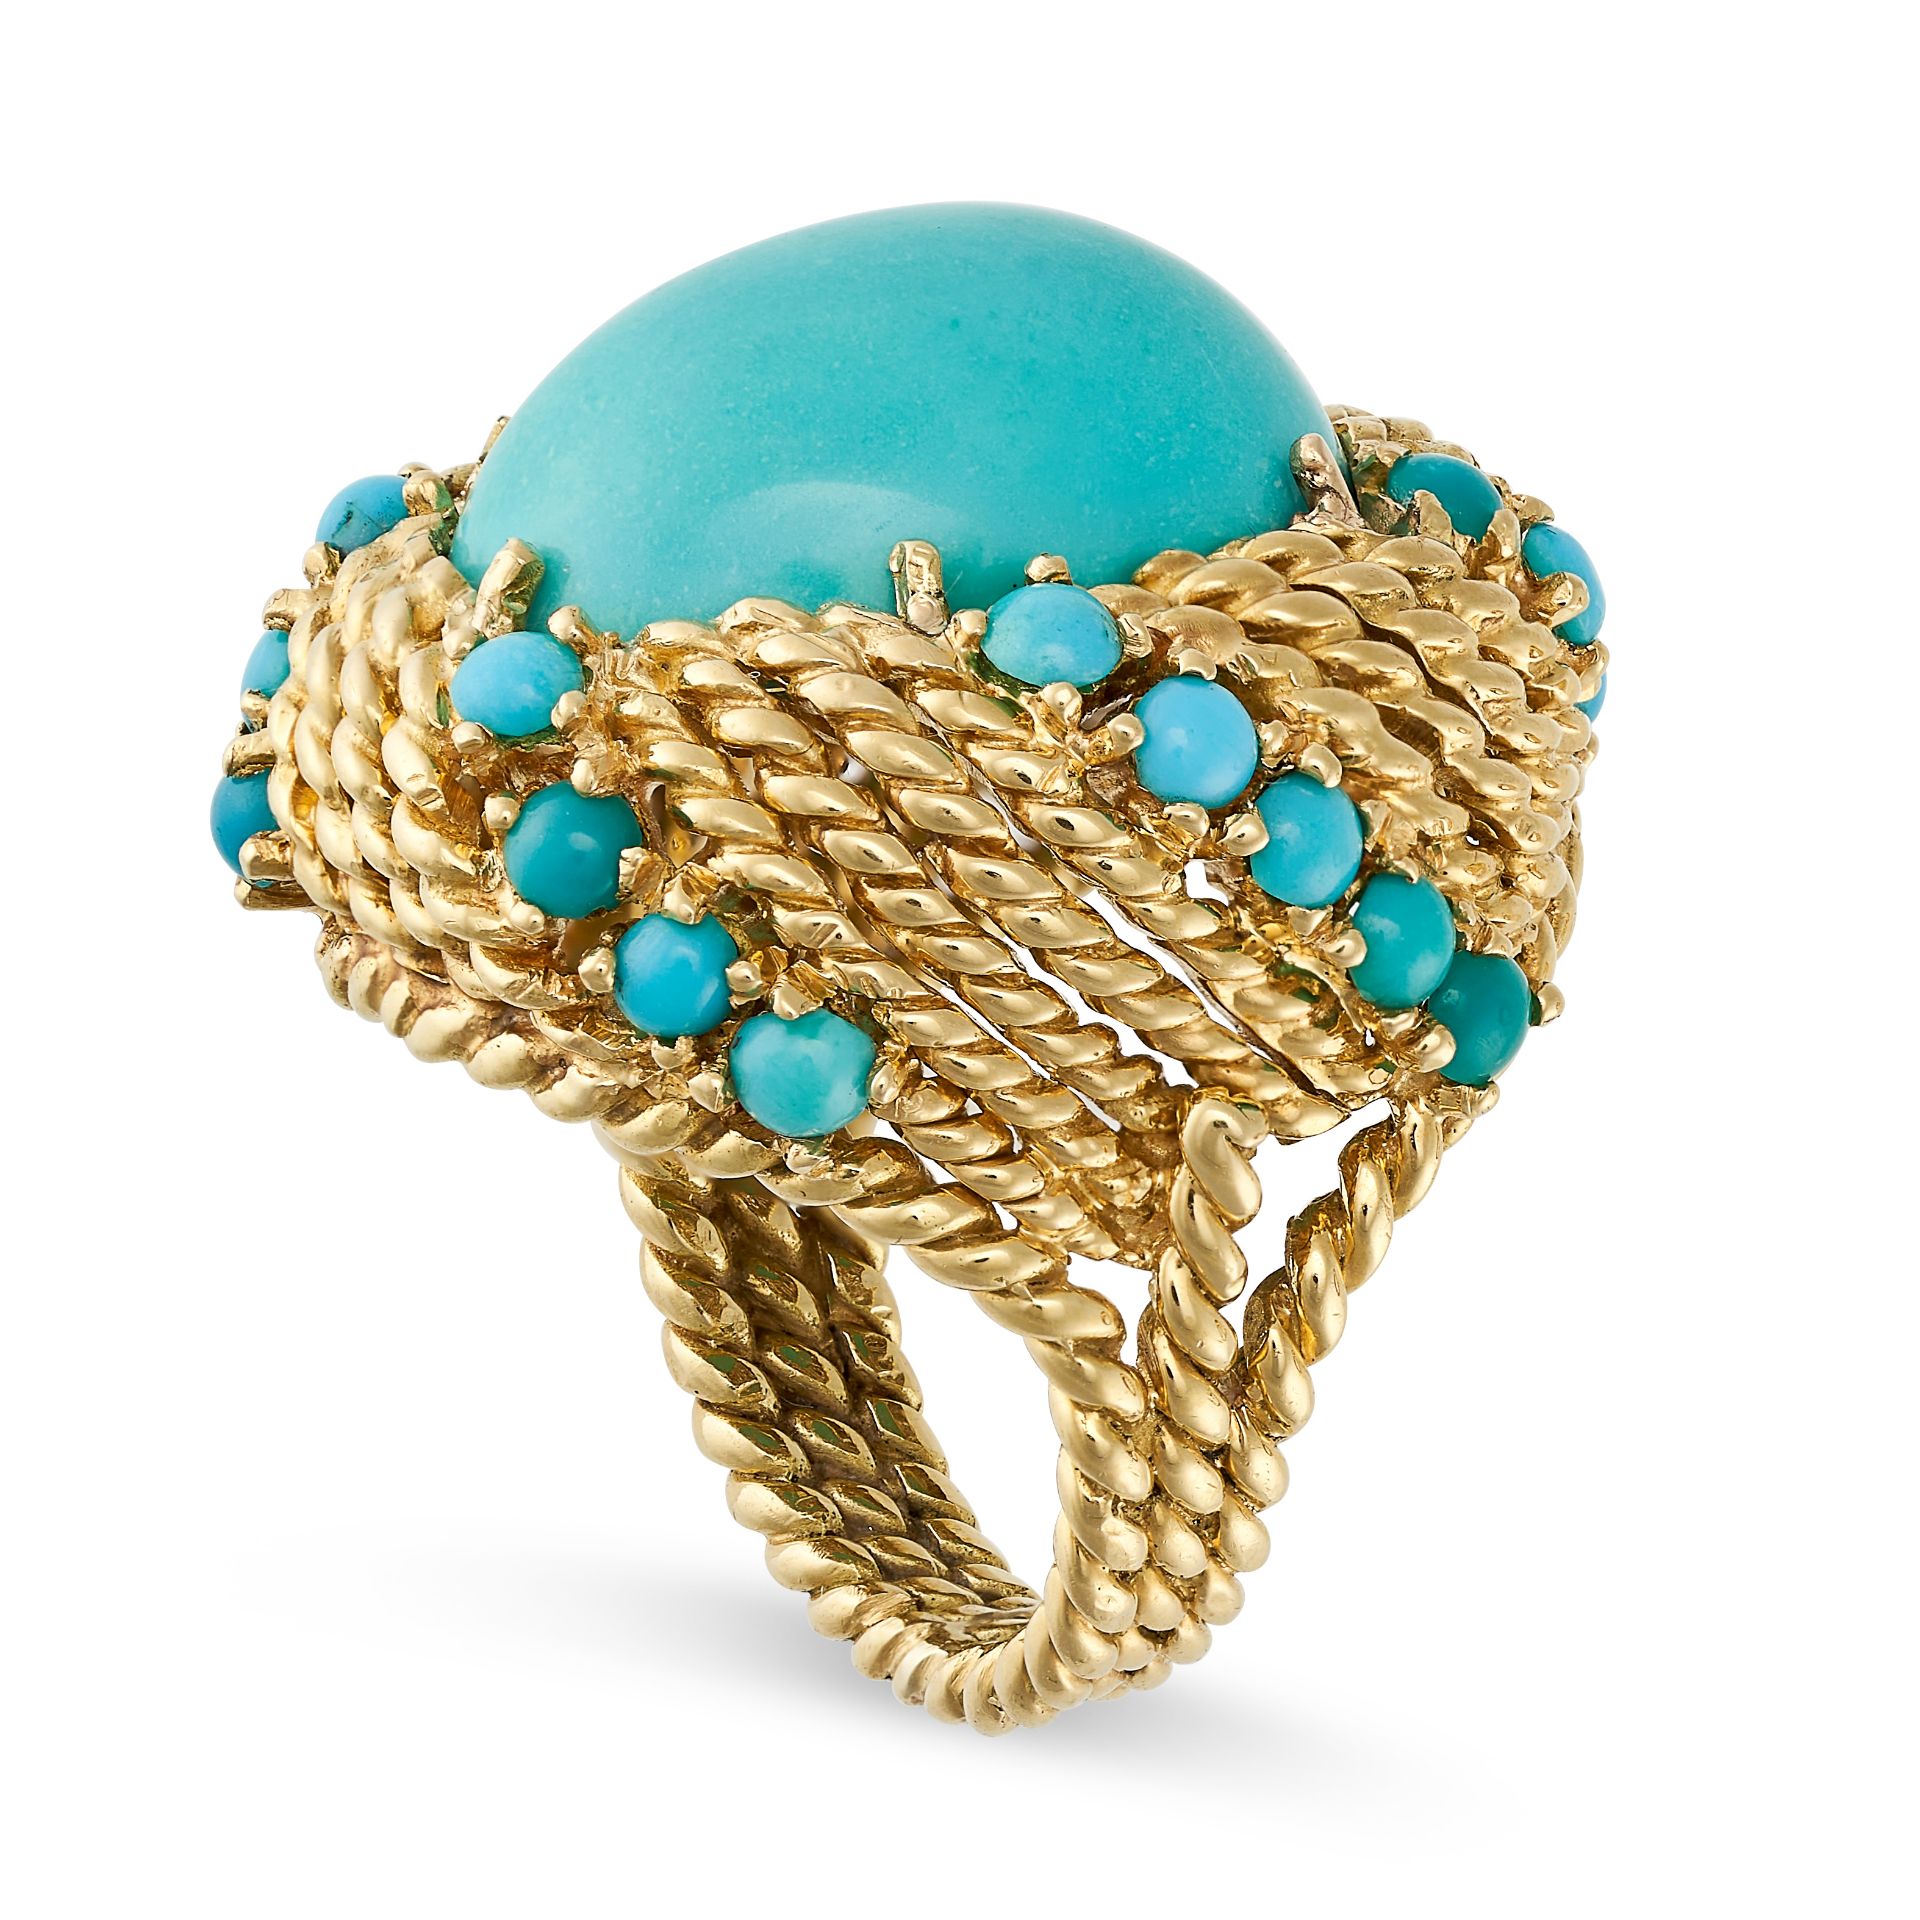 A VINTAGE TURQUOISE DRESS RING in 18ct yellow gold, set with a cabochon turquoise on a ground of - Image 2 of 2